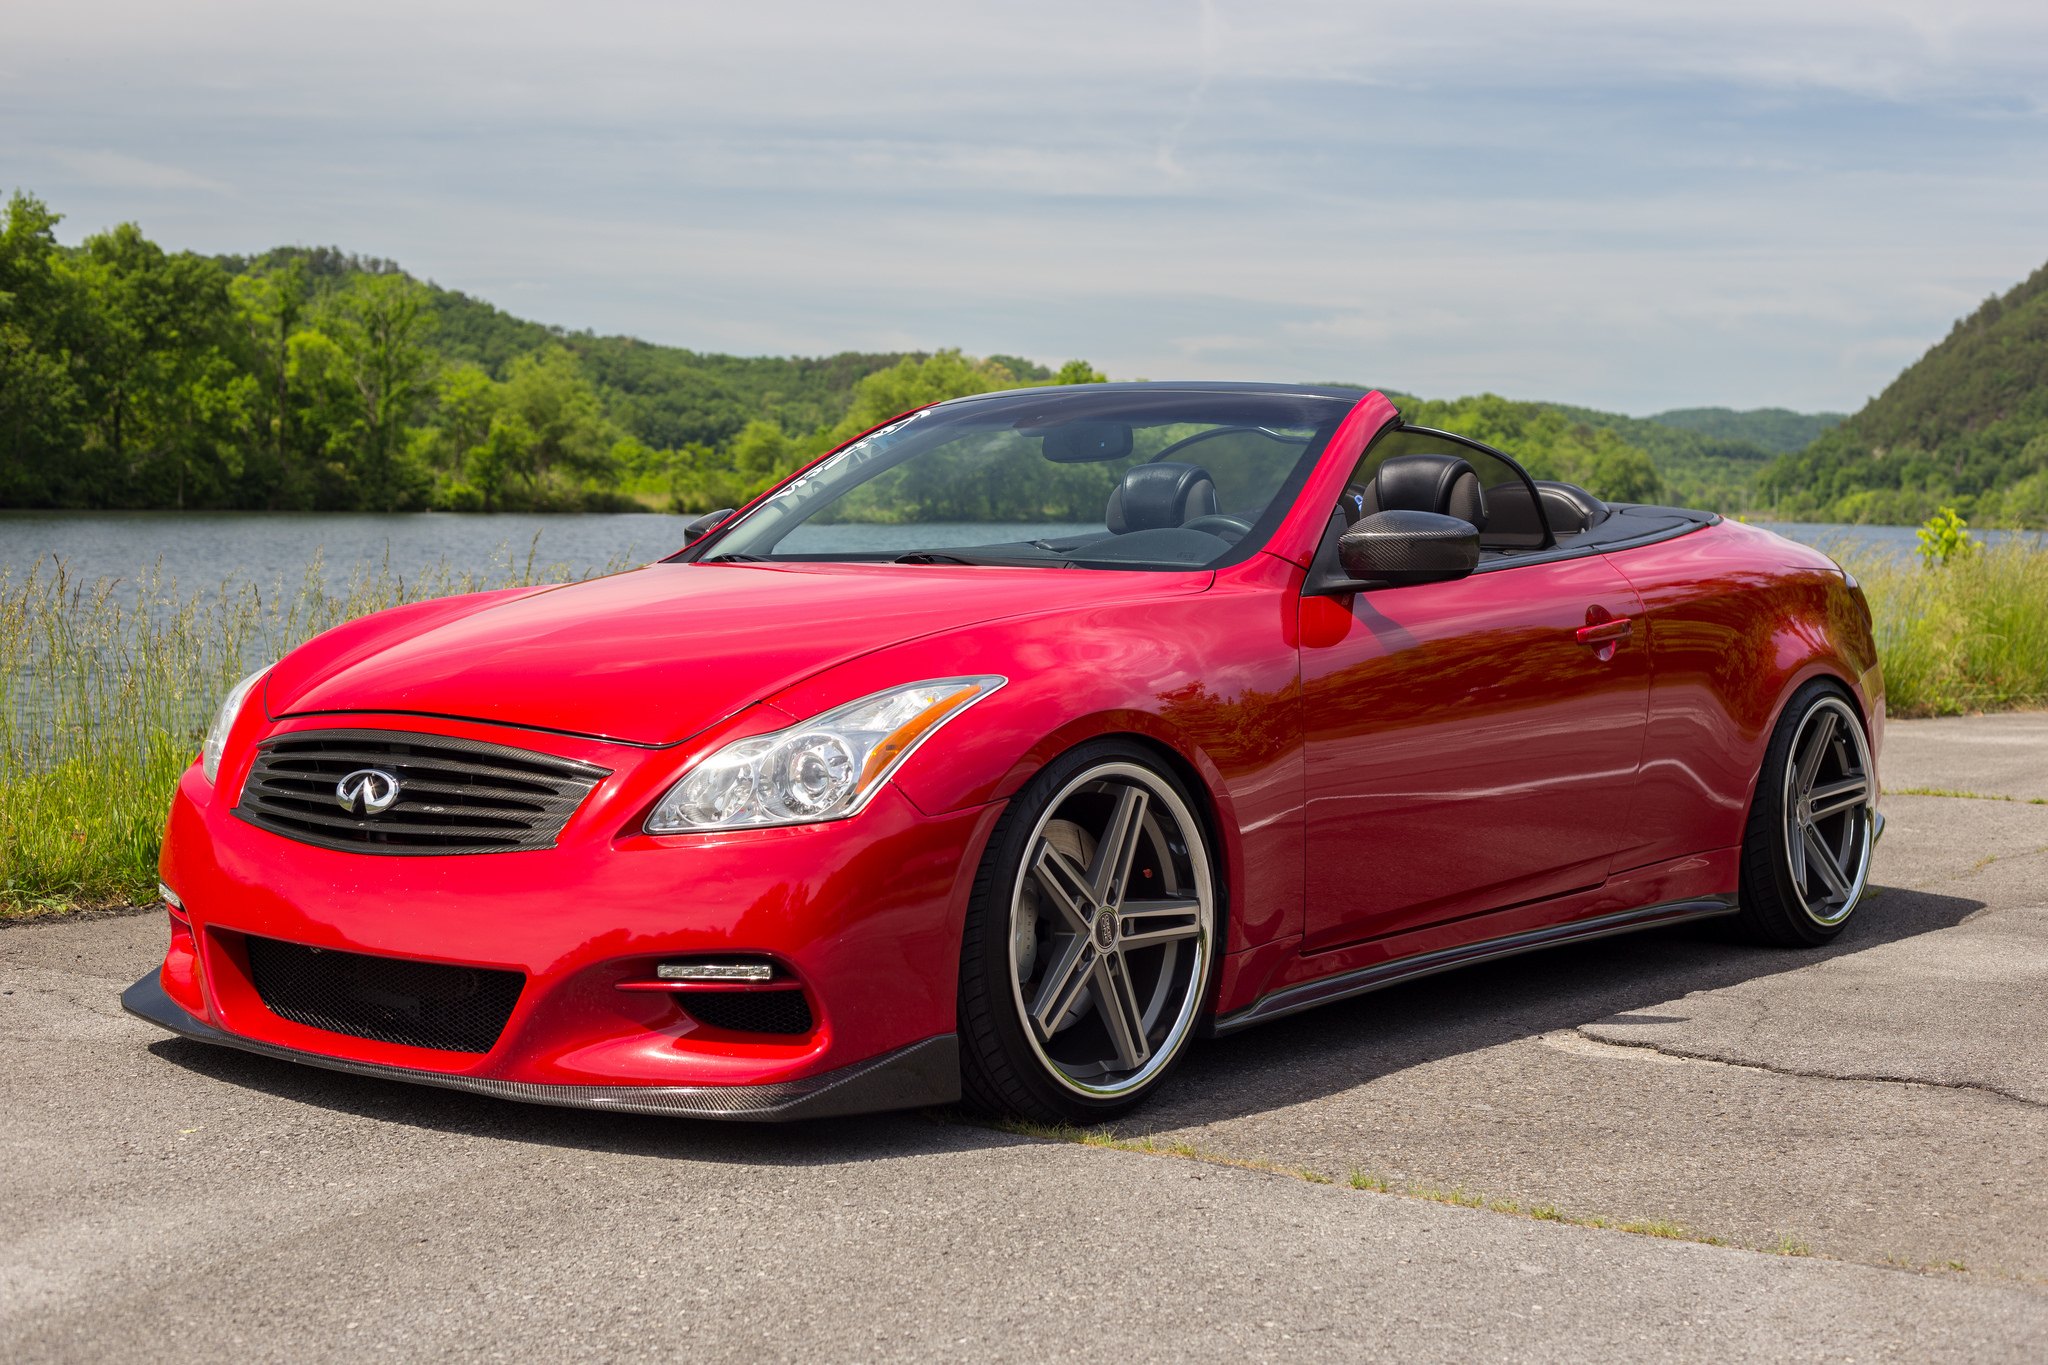 Show Stopper Red Infiniti G37 S Improved With Aftermarket